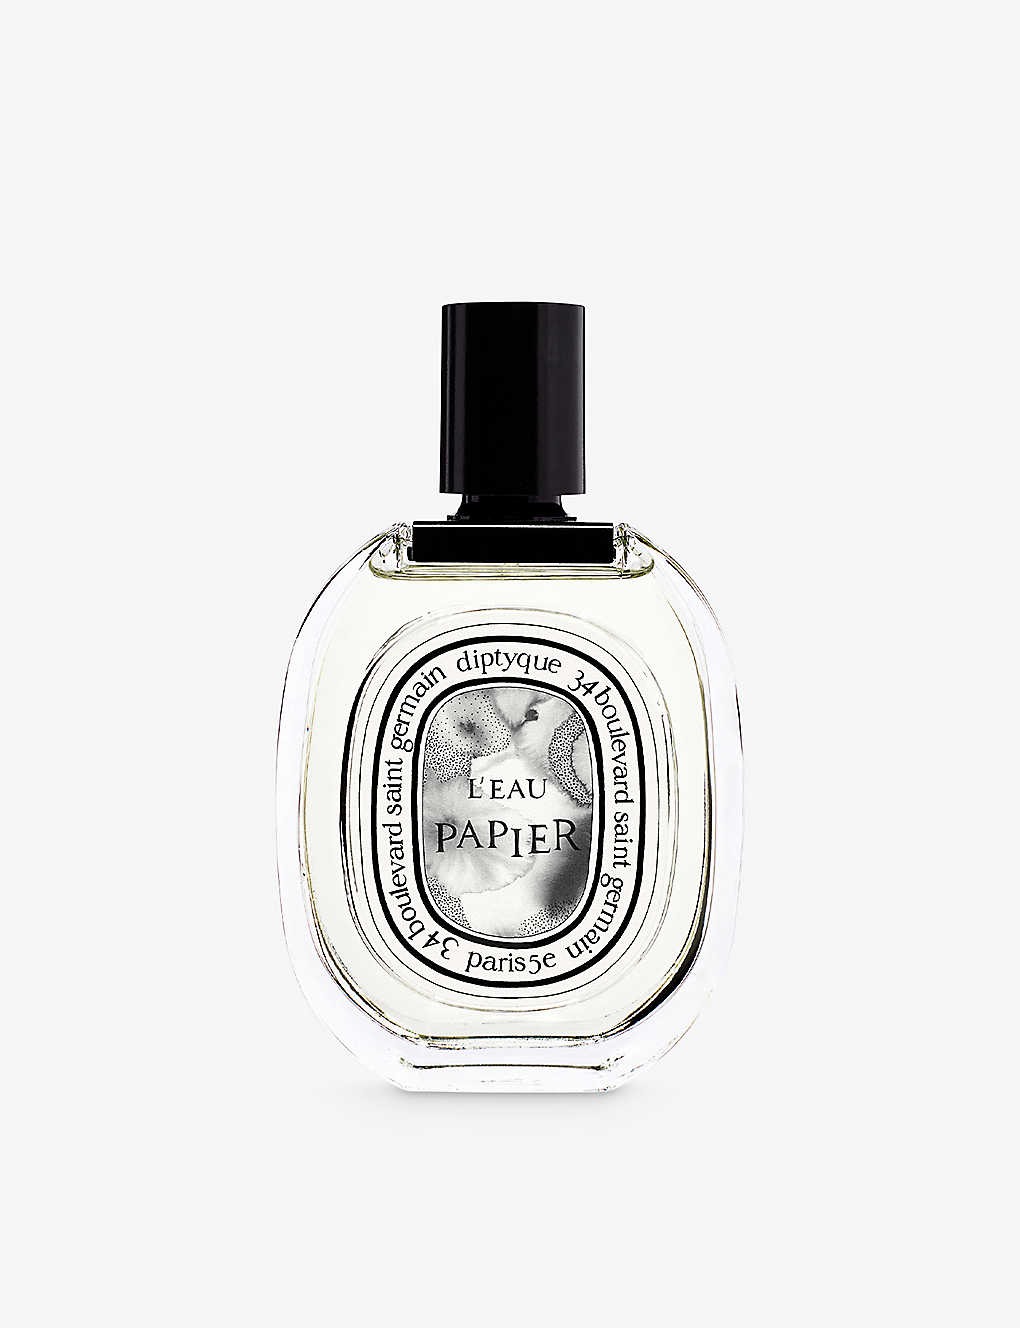 The best new fragrances and perfumes to buy right now for Spring 2023